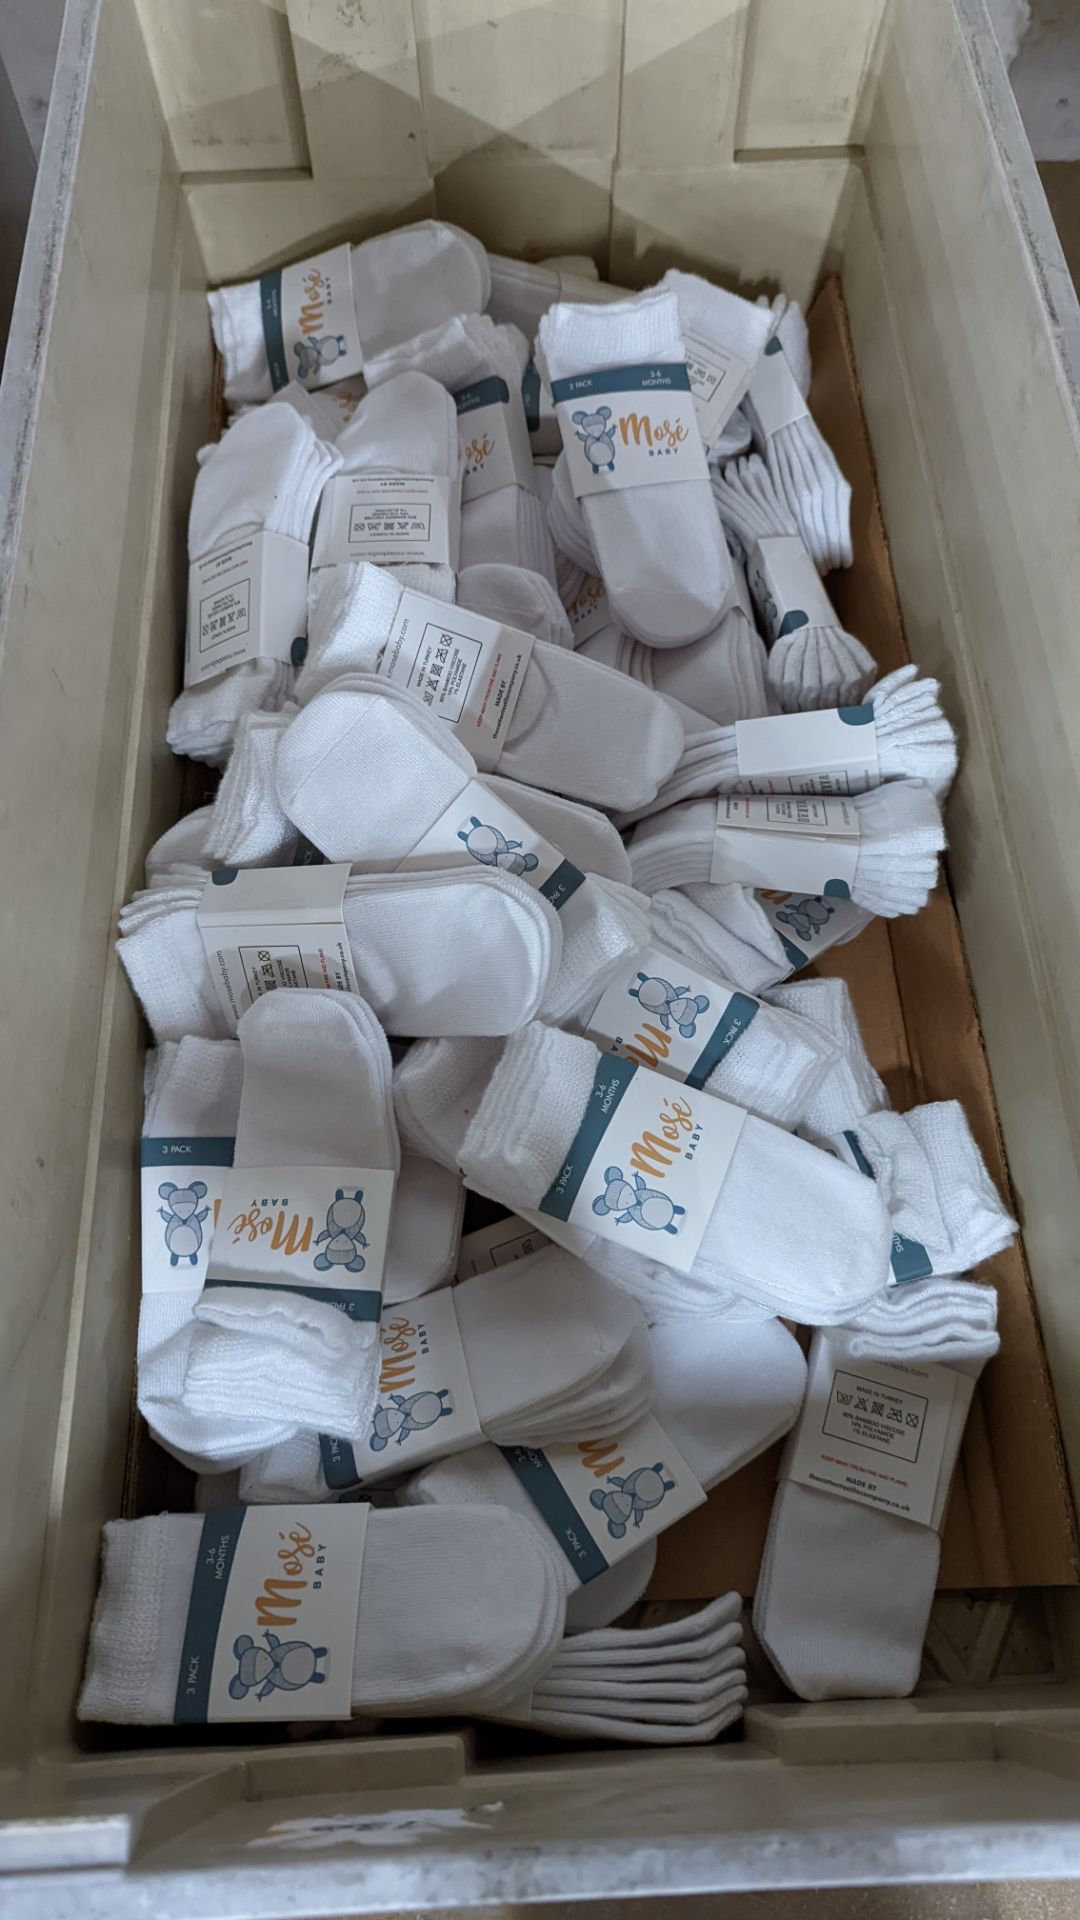 50 off Mosé Baby white sock three packs. Each pack consists of 3 pairs of white socks suitable for - Image 4 of 4